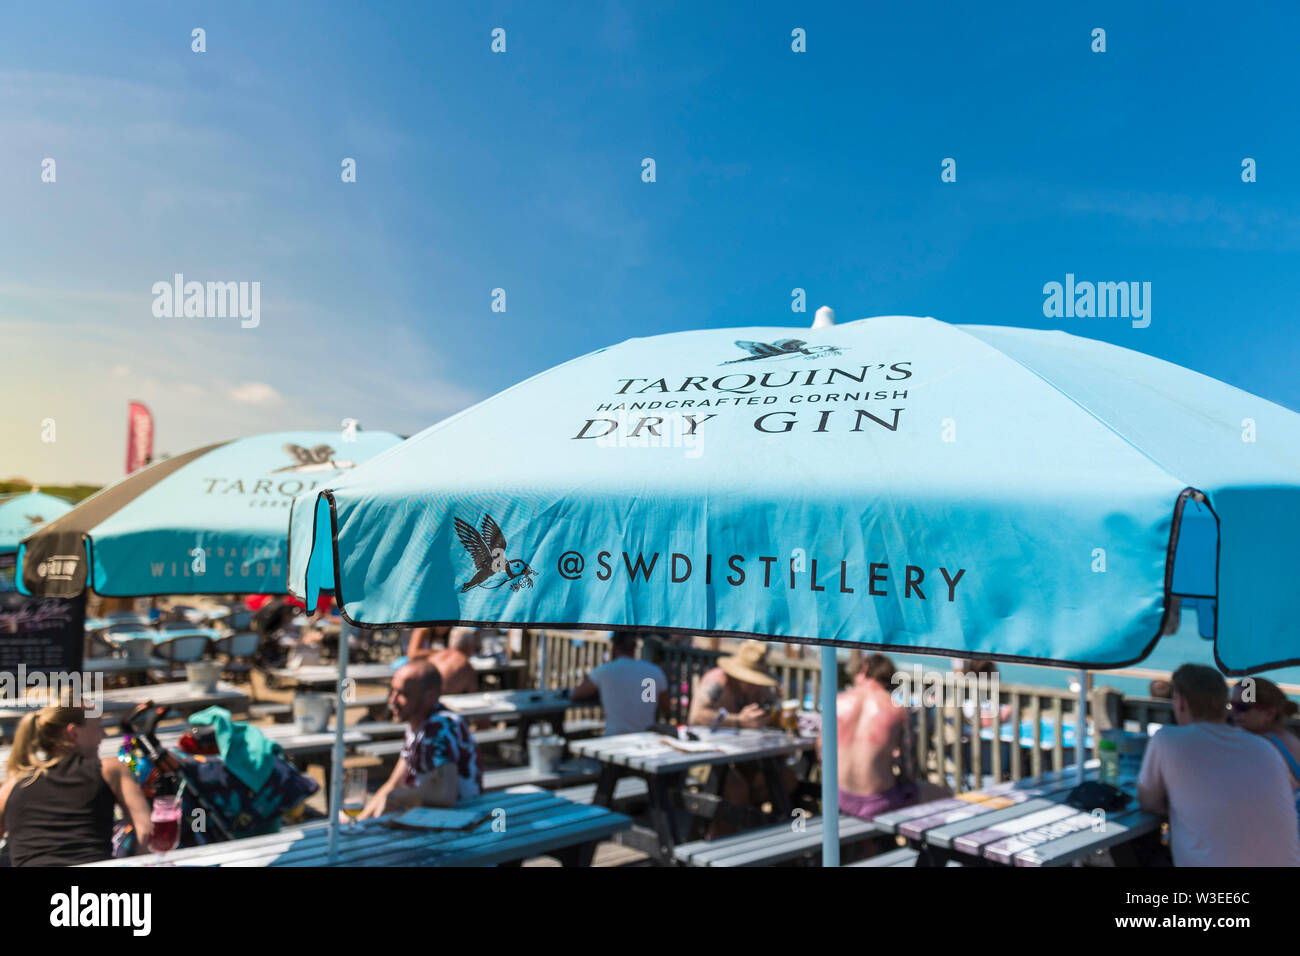 Tarquin’s Gin sponsored umbrellas providing welcome shade on a very hot day over Fistral Beach Bar in Fistral in Newquay in Cornwall. Stock Photo